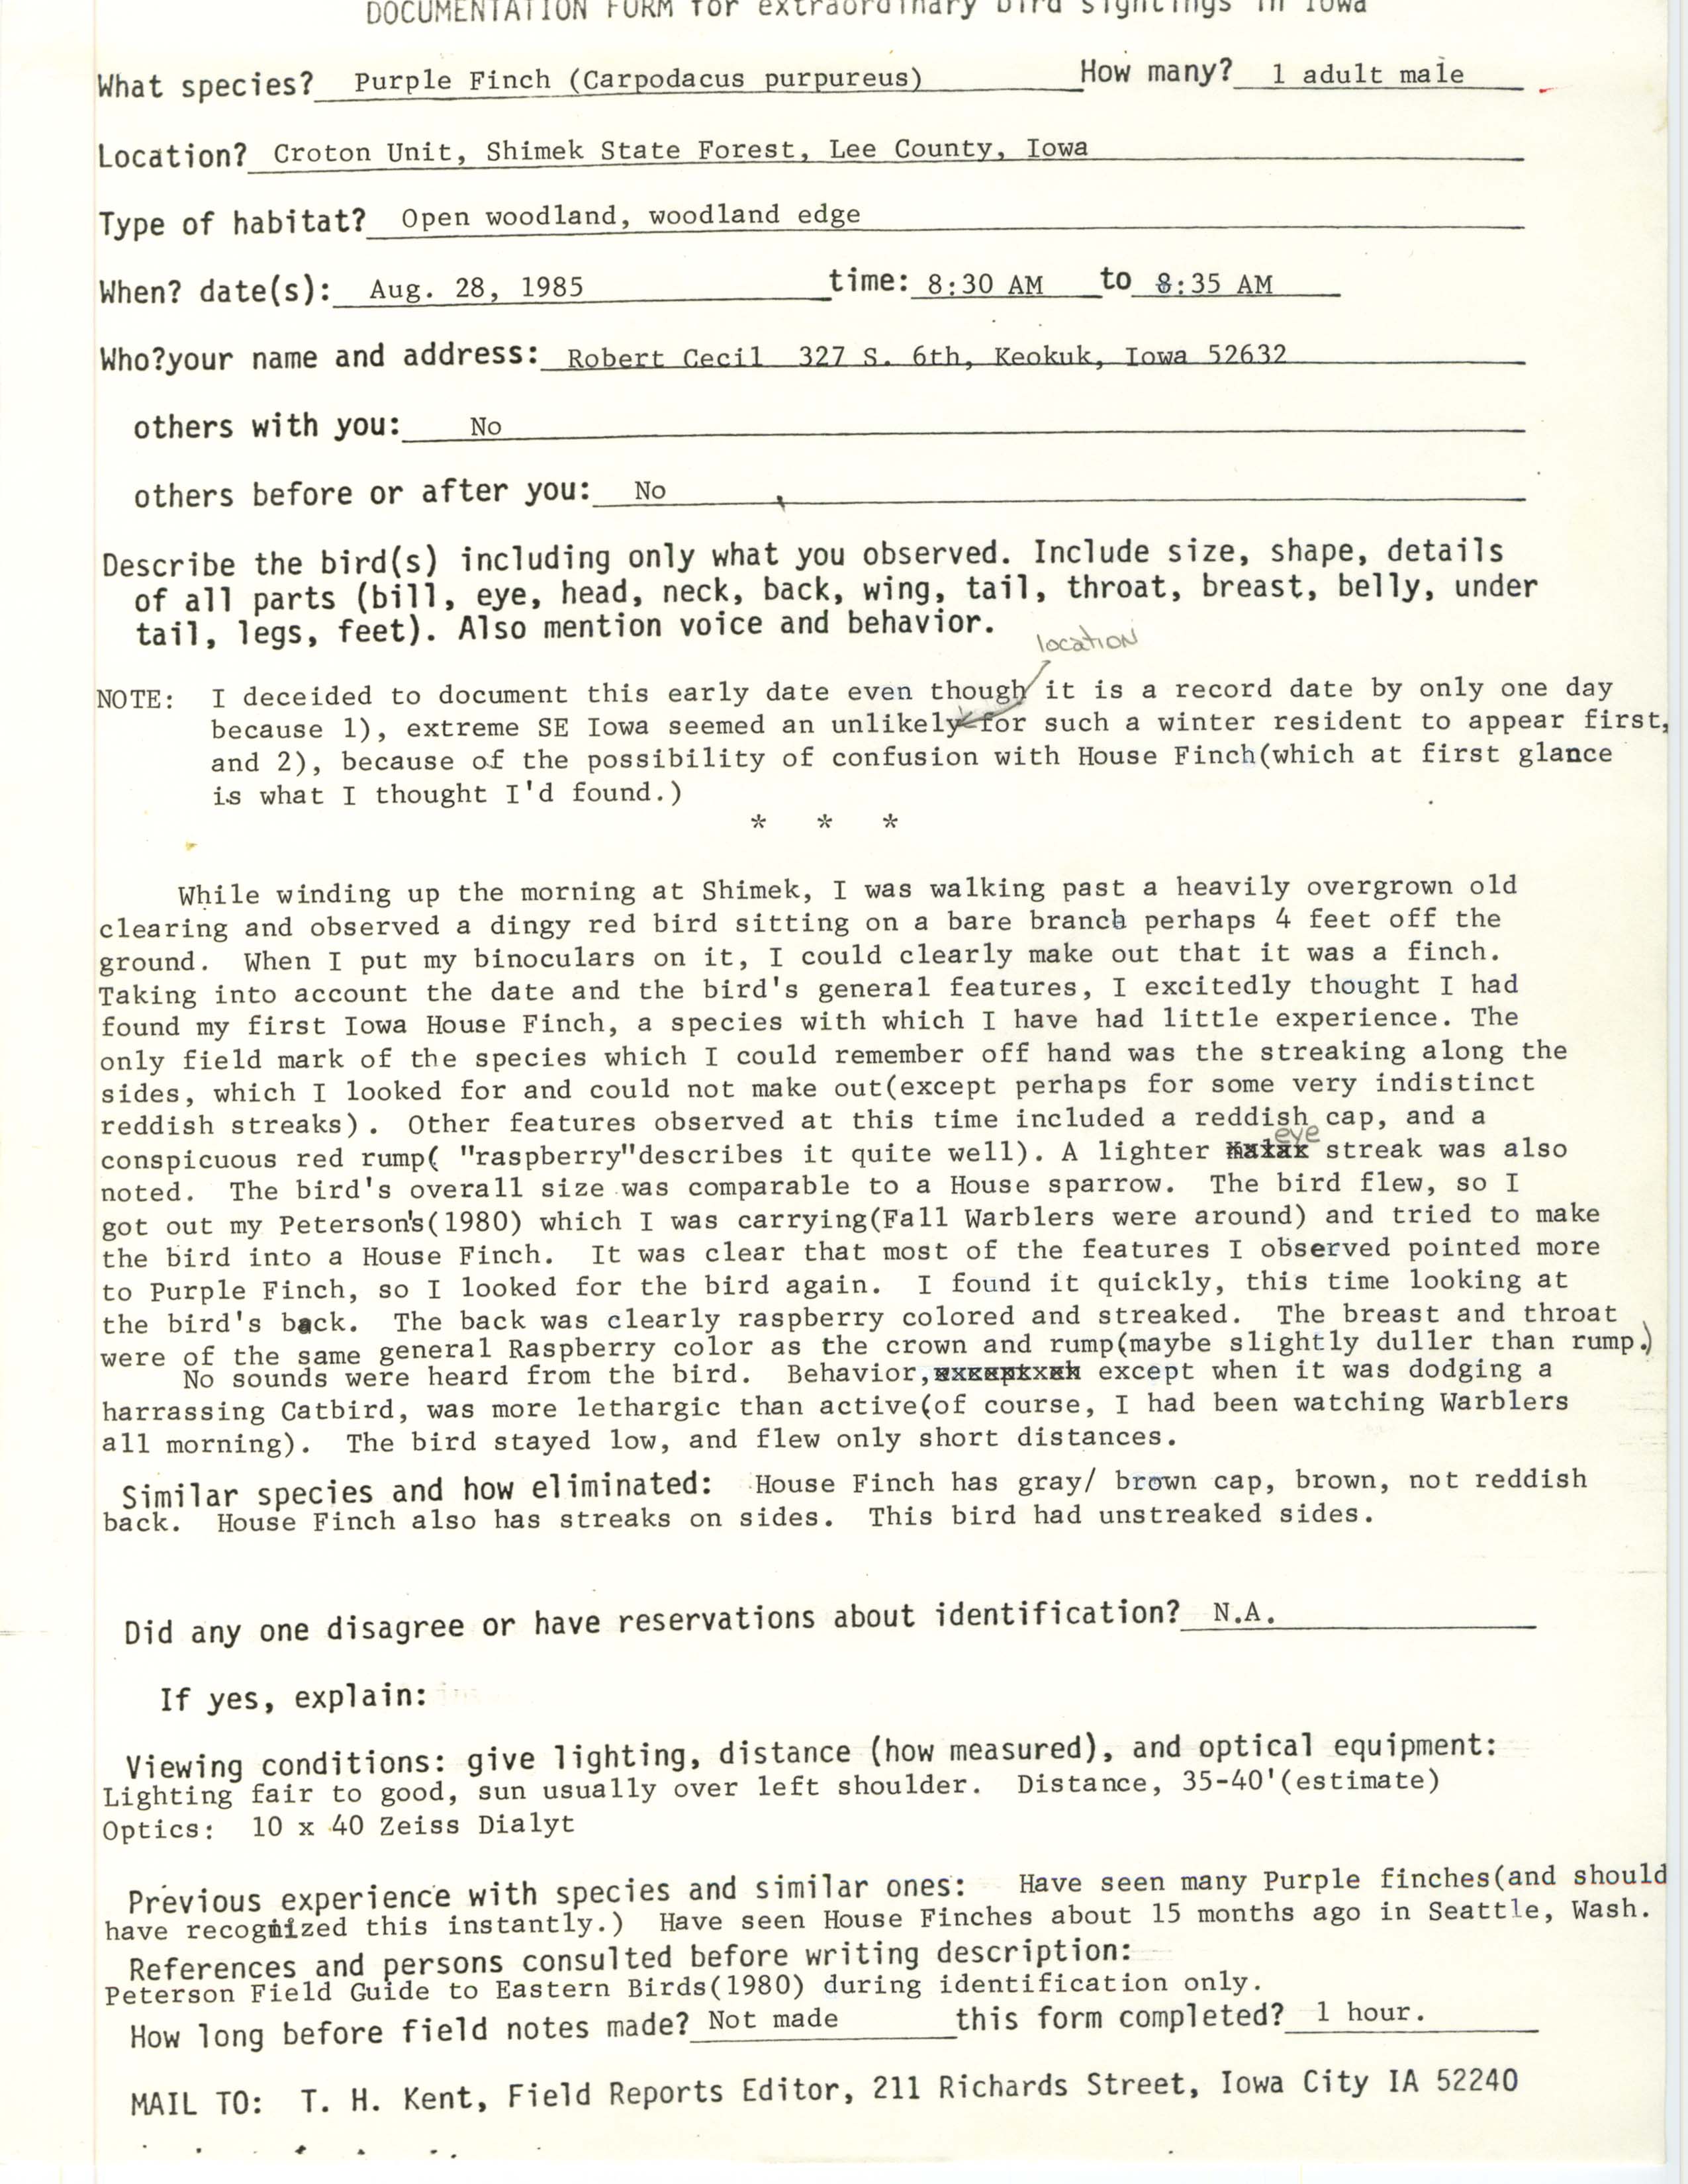 Rare bird documentation form for Purple Finch at the Croton Unit at Shimek State Forest, 1985